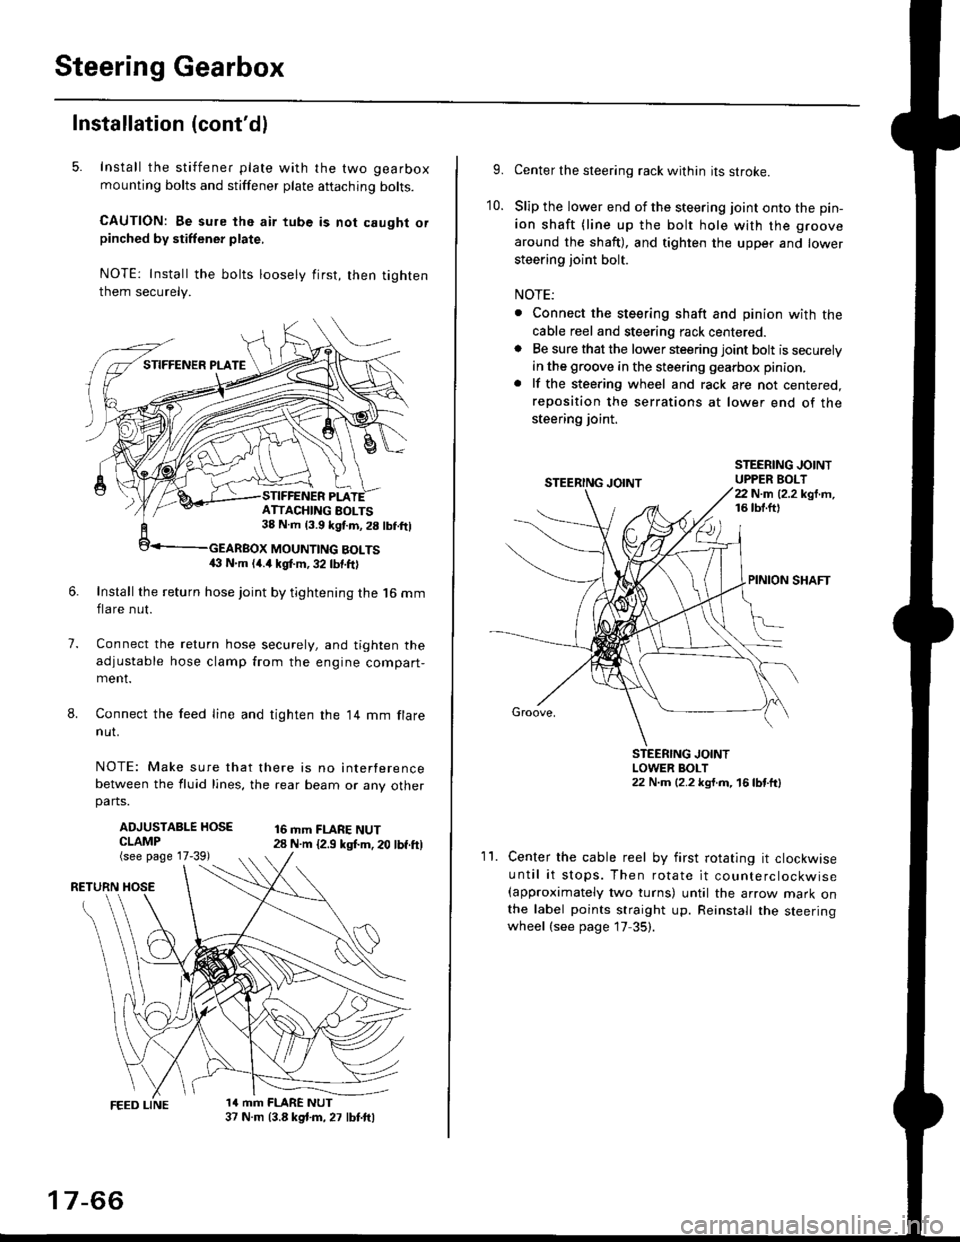 HONDA CIVIC 1996 6.G Workshop Manual Steering Gearbox
Installation (contdl
5. Install the stiffener plate with the two gearbox
mounting bolts and stiffener plate aftaching bolts.
CAUTION: Be sure the air tube is not caught orpinched by 